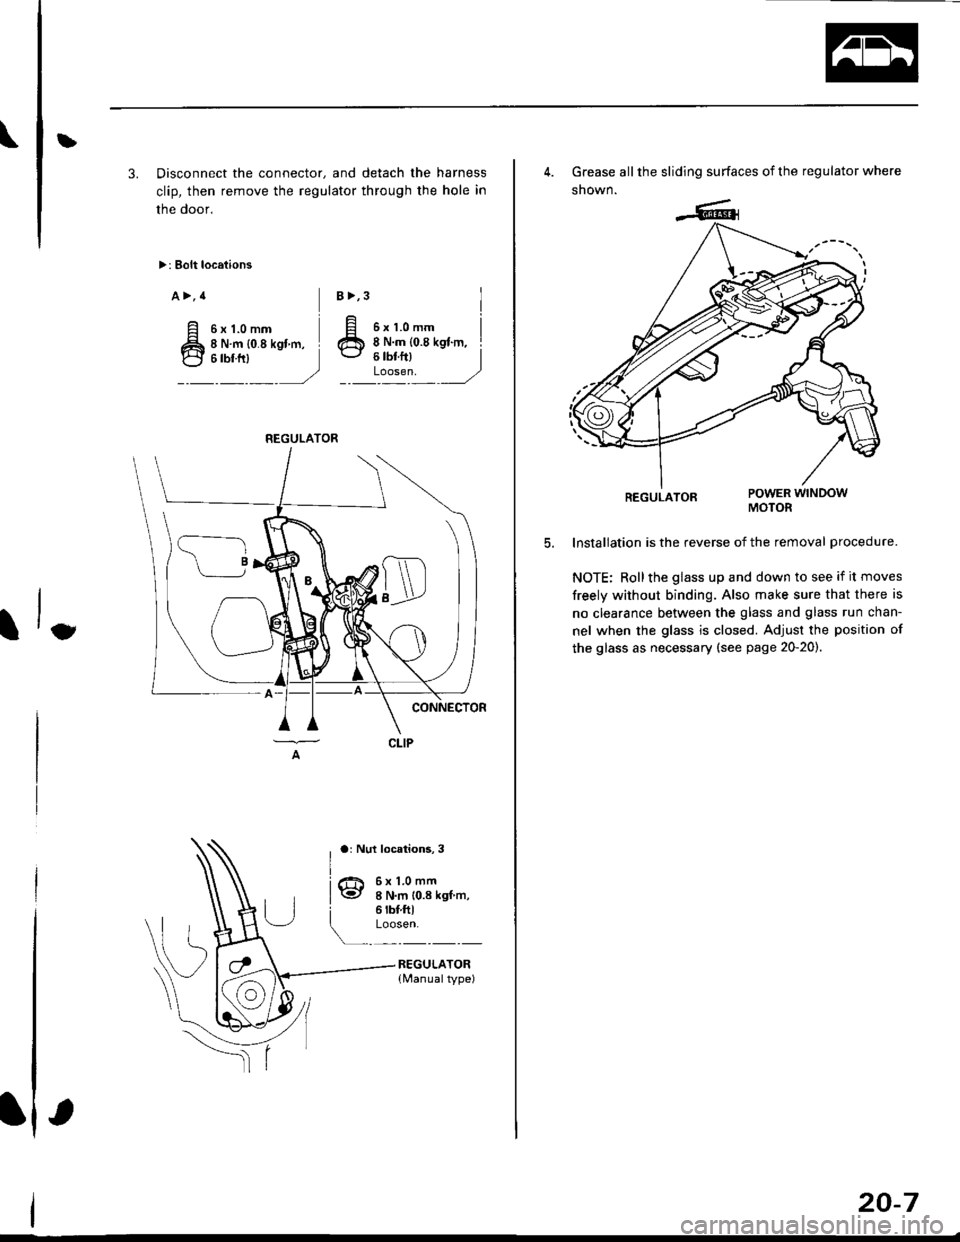 HONDA CIVIC 1999 6.G Workshop Manual \L
3. Disconnect the connector, and detach the harness
clip, then remove the regulator through the hole in
the door,
>: Bolt locations
a>,4
ttt*, 
)
6x1.0mm8 N.m {0.8 kgl m,
B>,3
ar Nul locations, 3
I